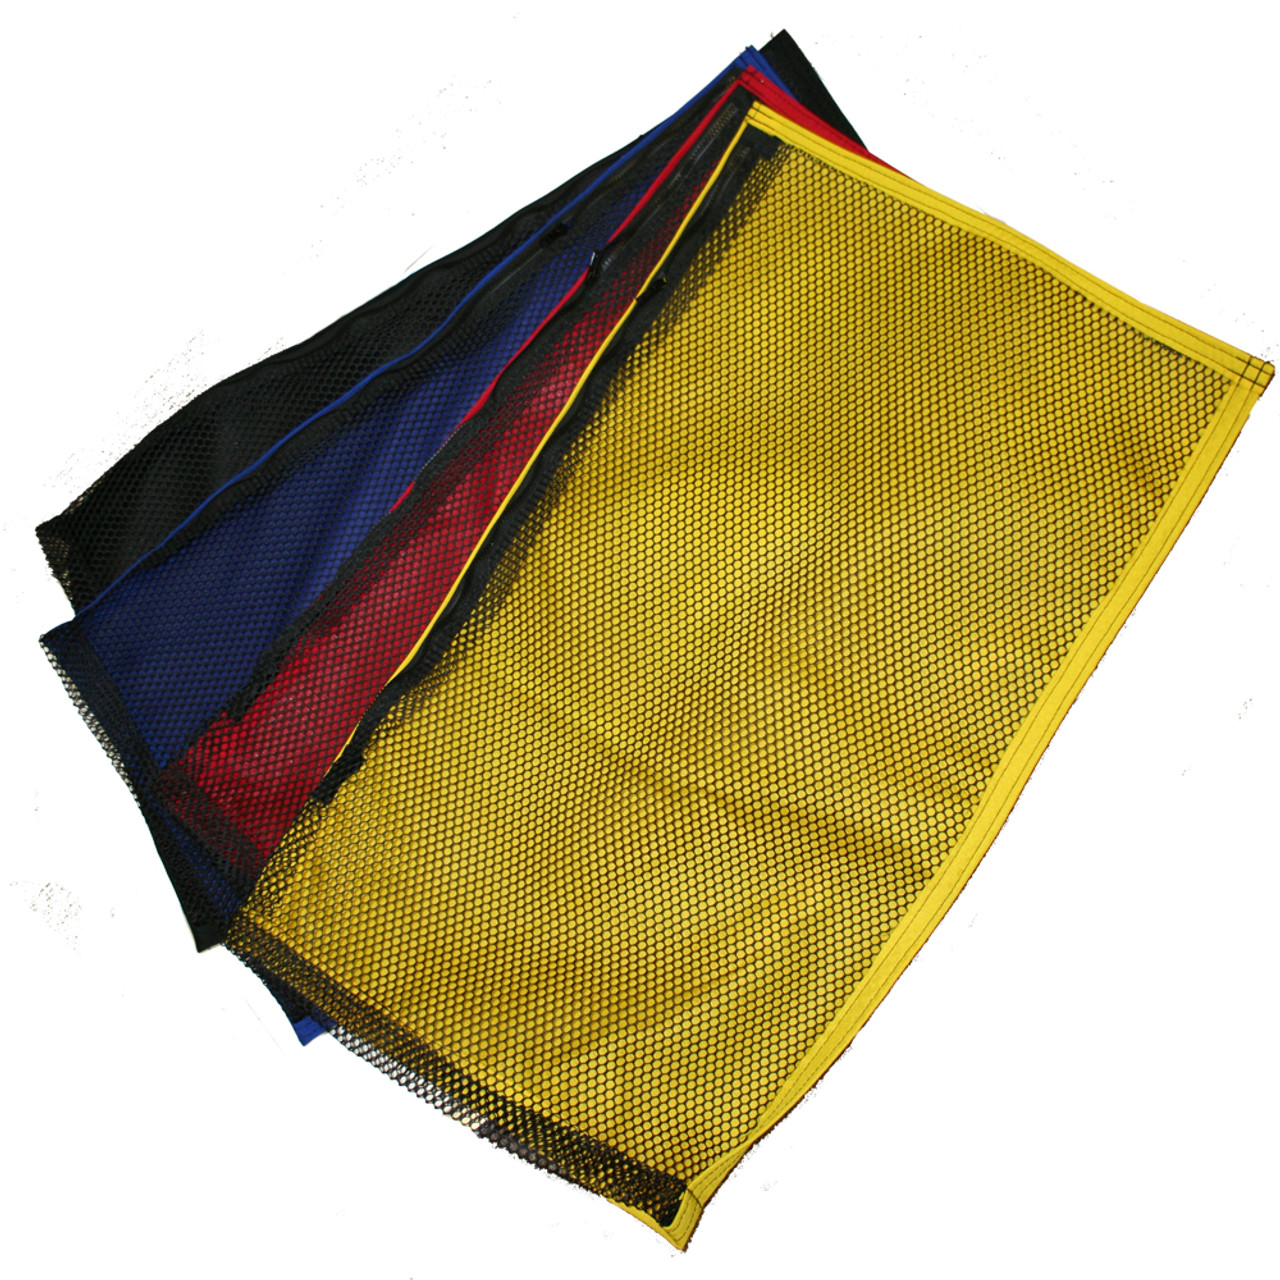 JCS Solid Cordura Nylon and Nylon Mesh Lobster Inn with 7 PVC Opening 4 Popular Colors 